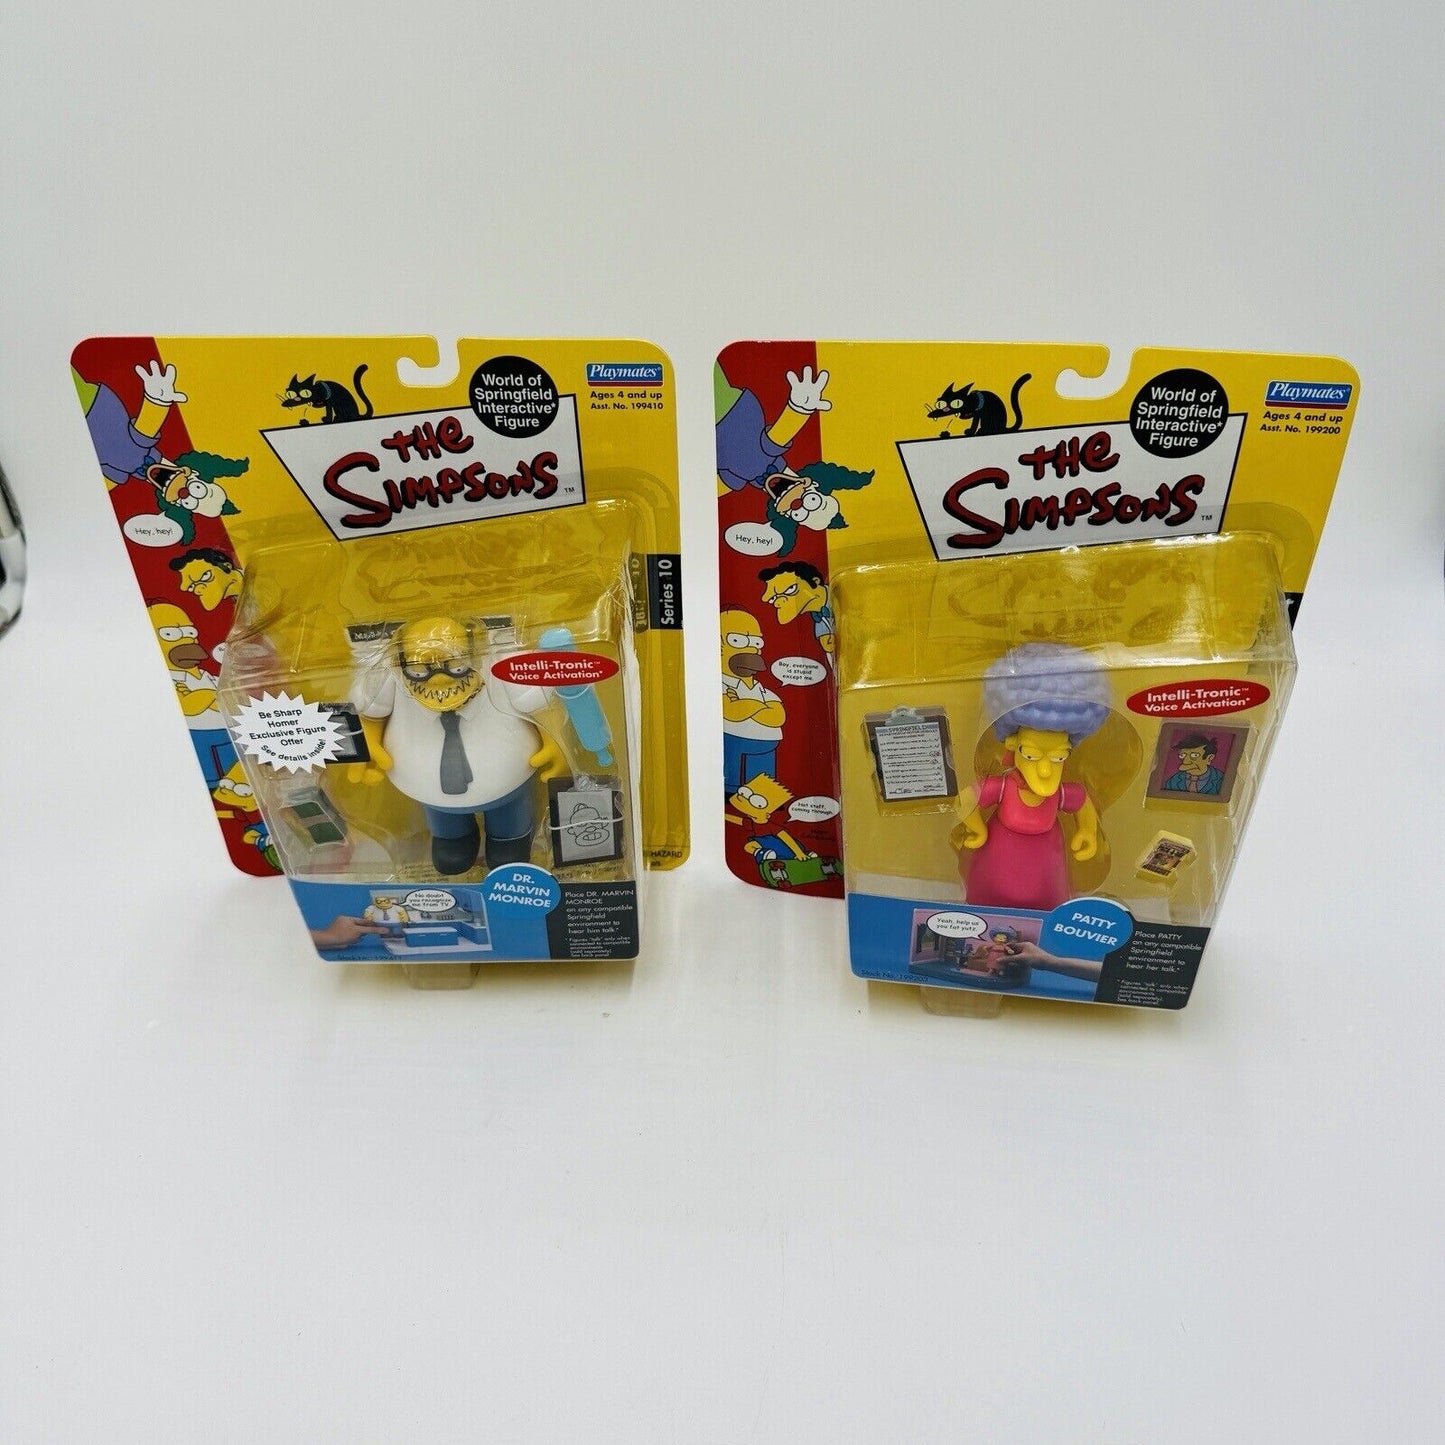 THE SIMPSONS World Of Springfield Brand New Figures Playmates Dr Marvin & Patty